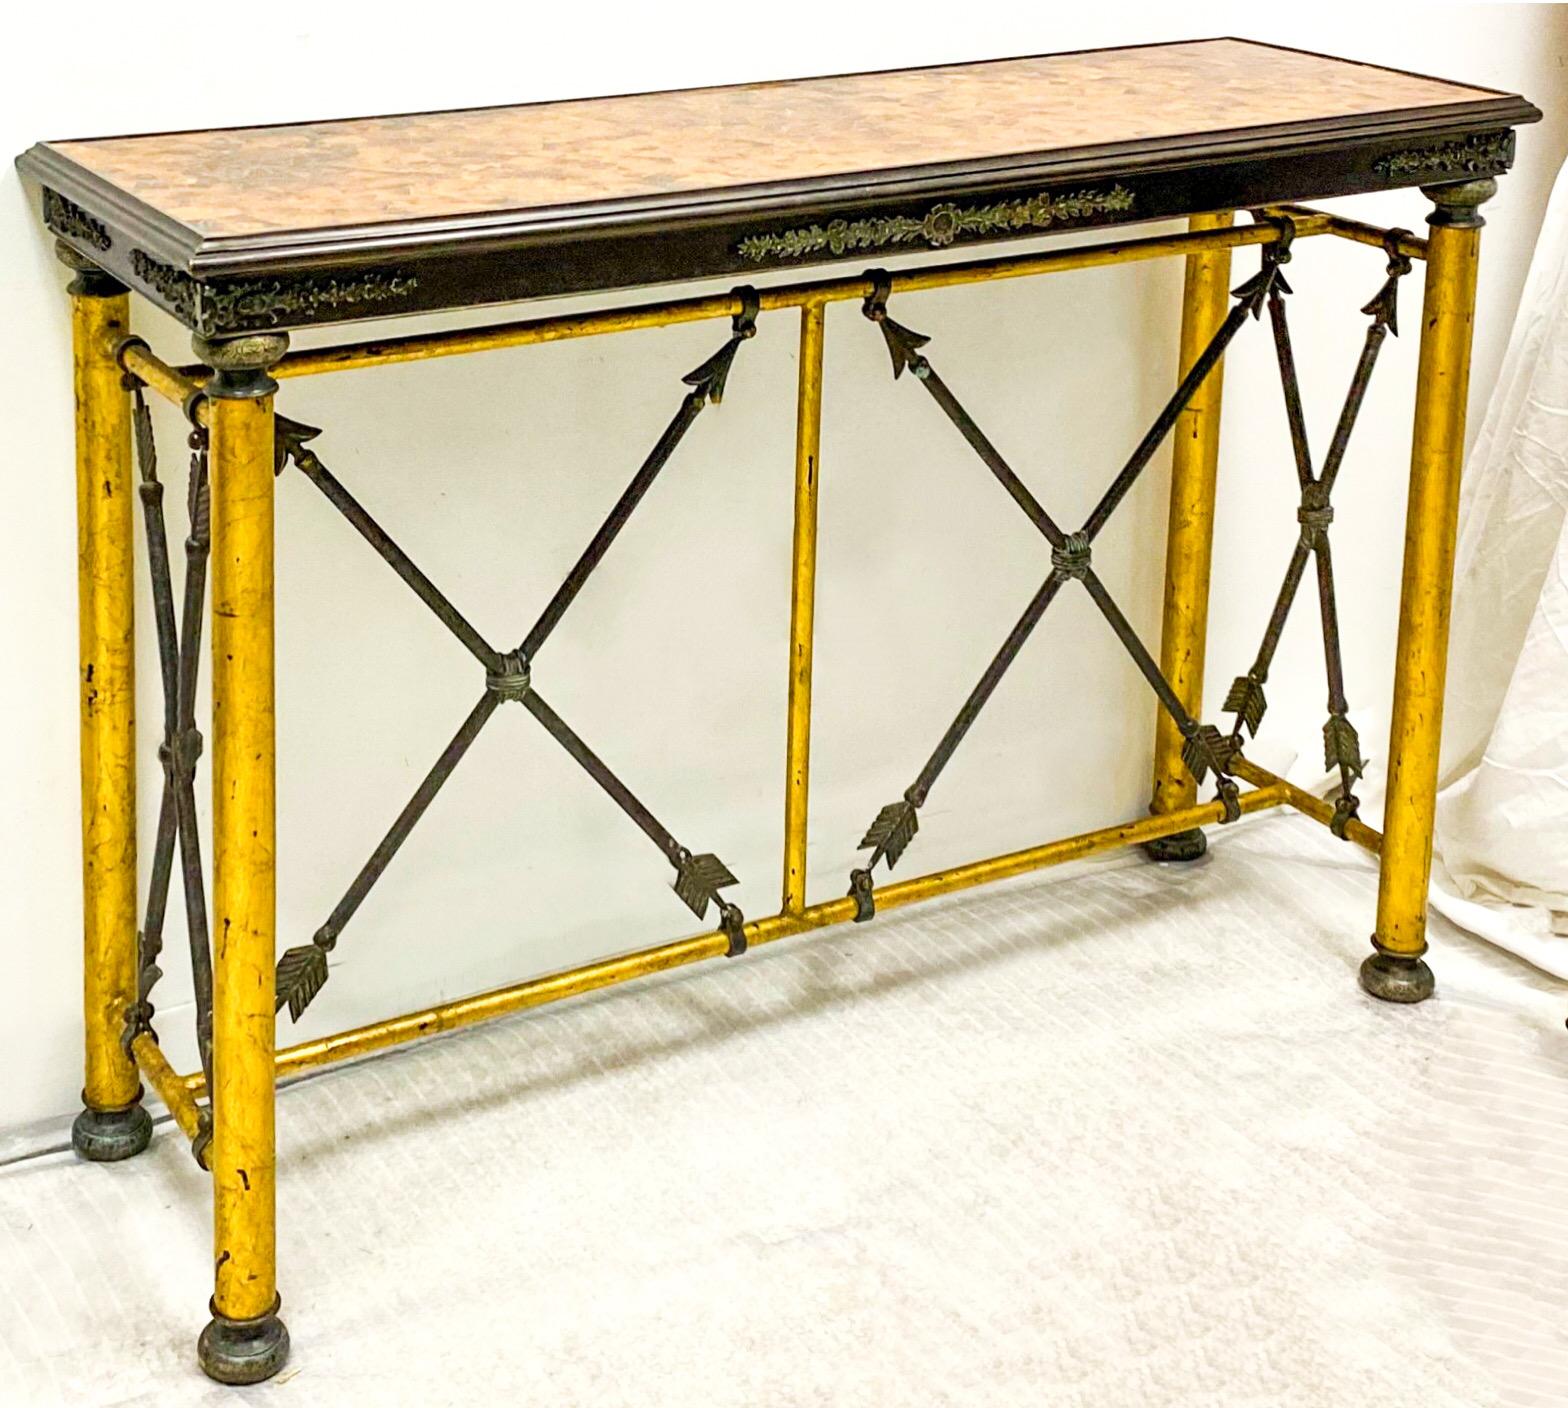 This is a wonderful late 20th century neo-classical style console table attributed to Maitland-Smith. The top has a faux tortoise finish, and the arrows are a heavy cast metal. The appointments are bronze.